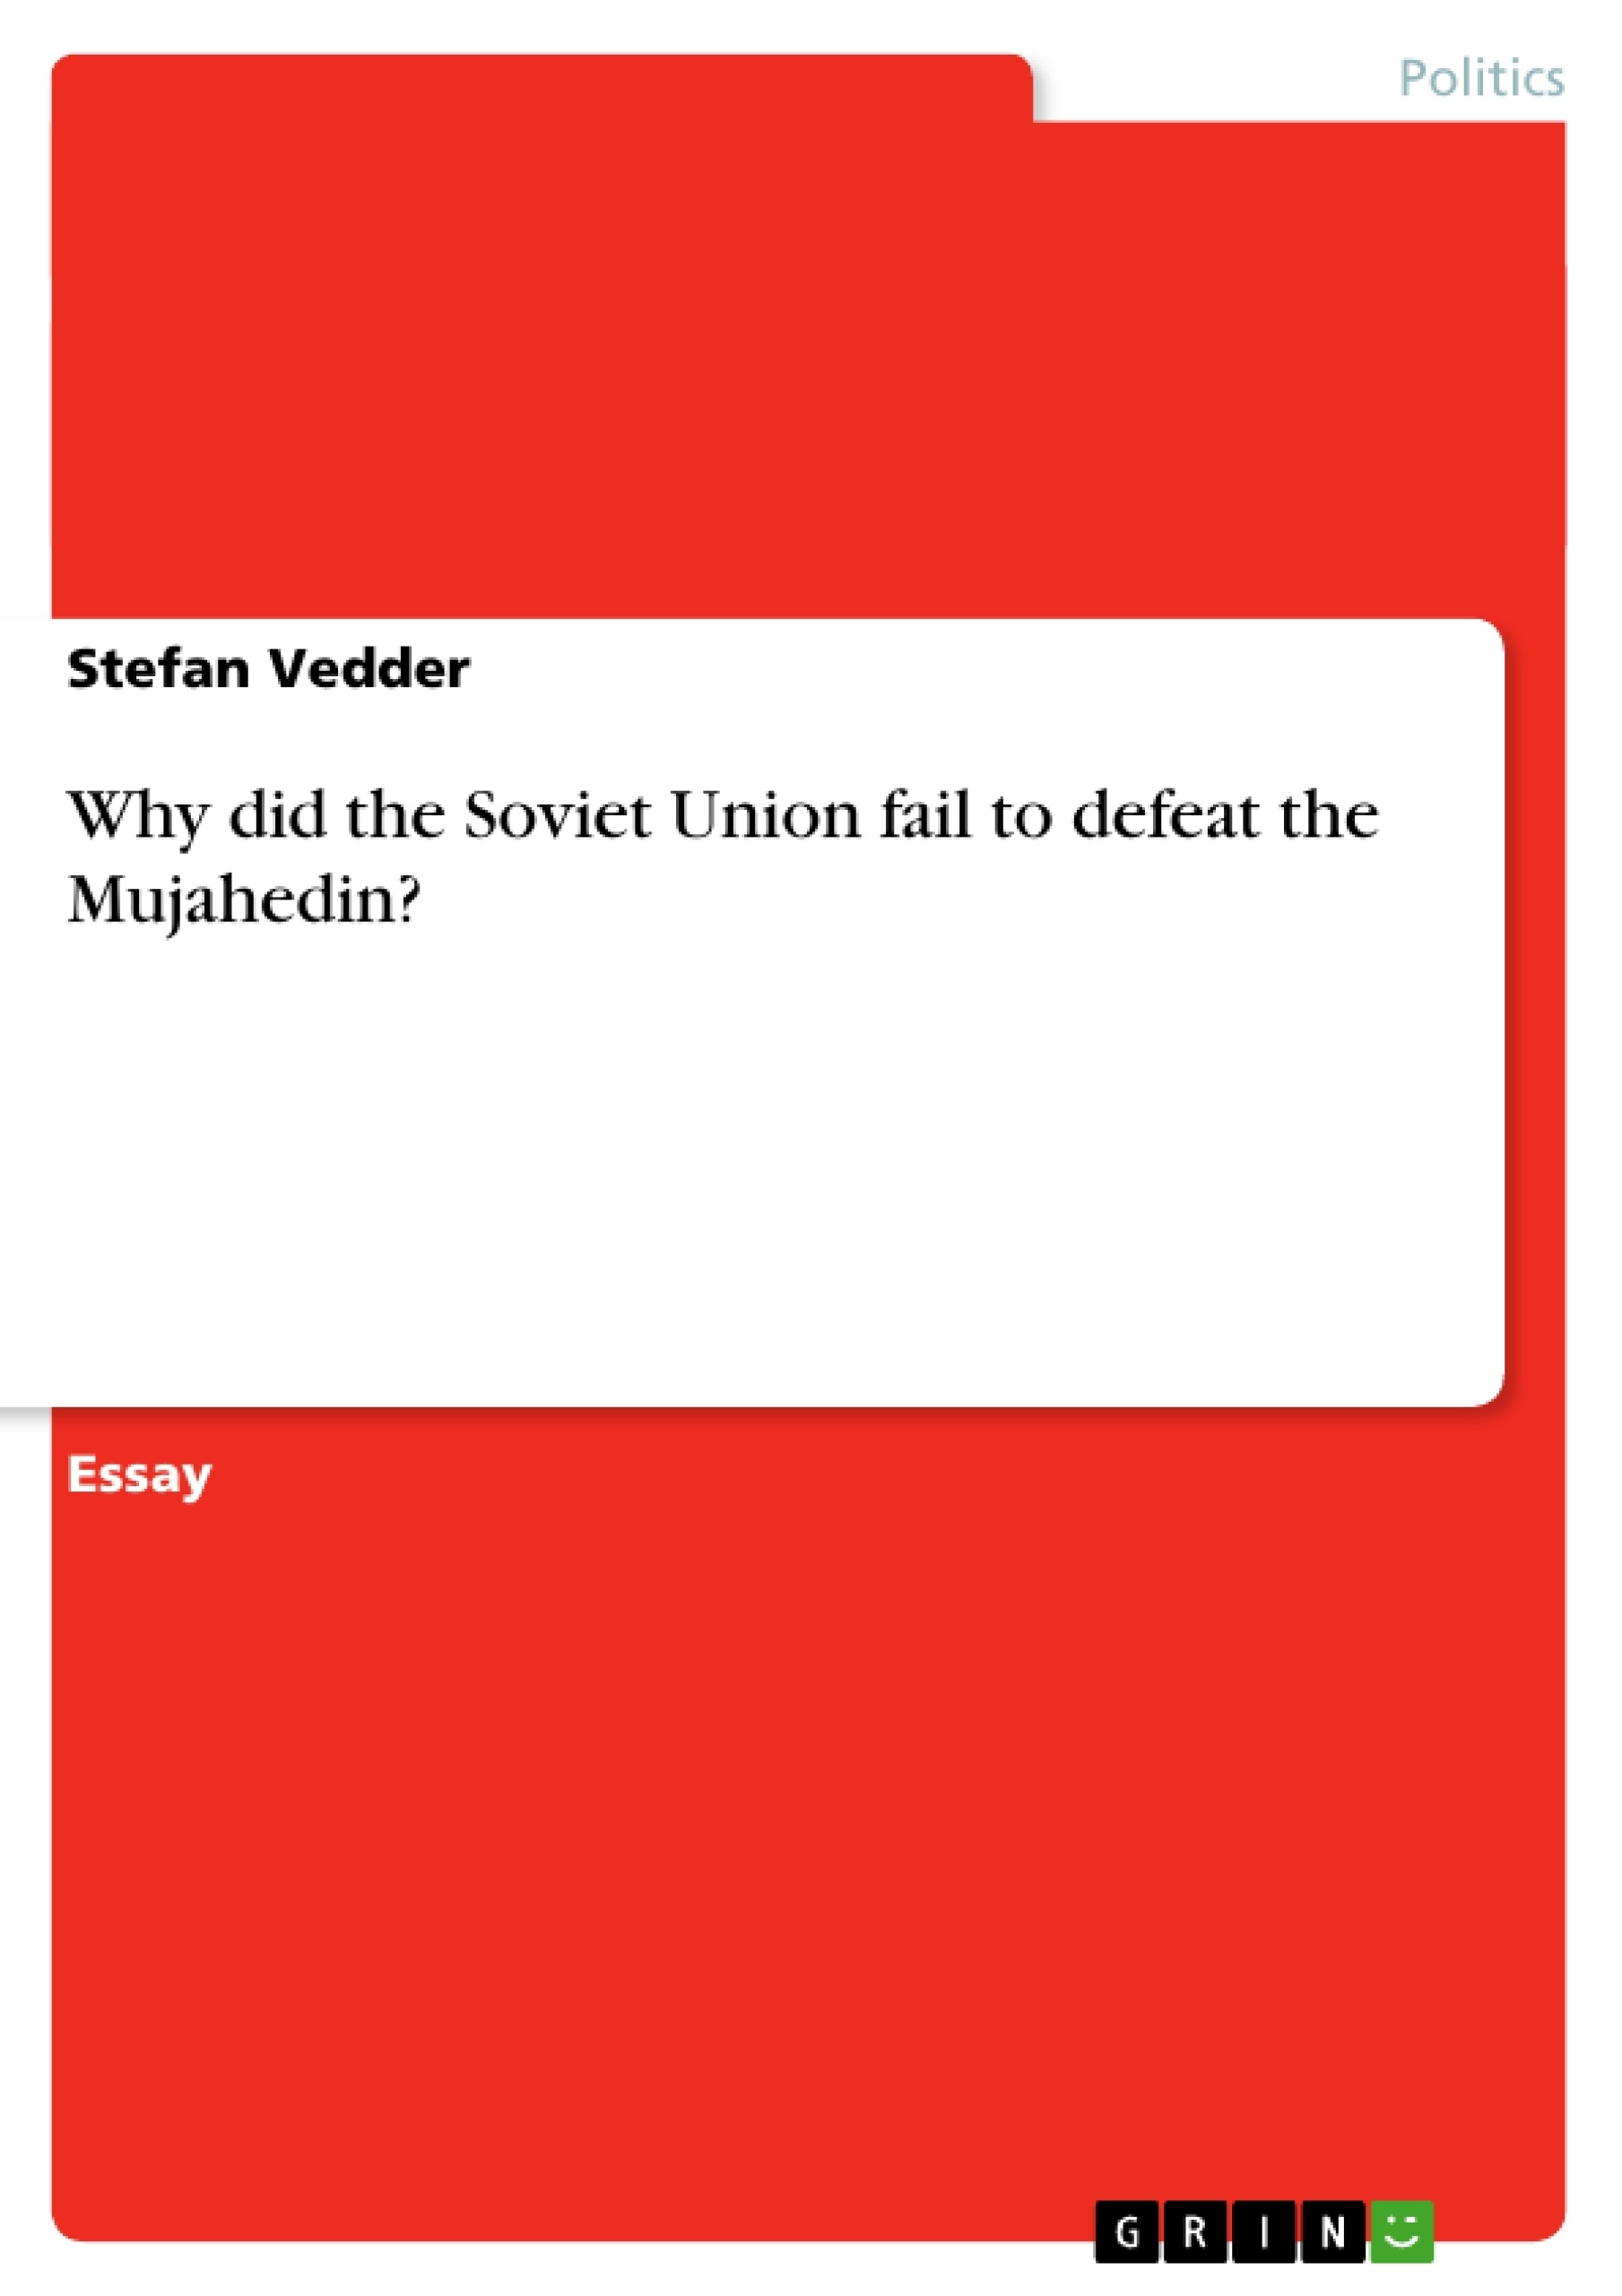 Titel: Why did the Soviet Union fail to defeat the Mujahedin?